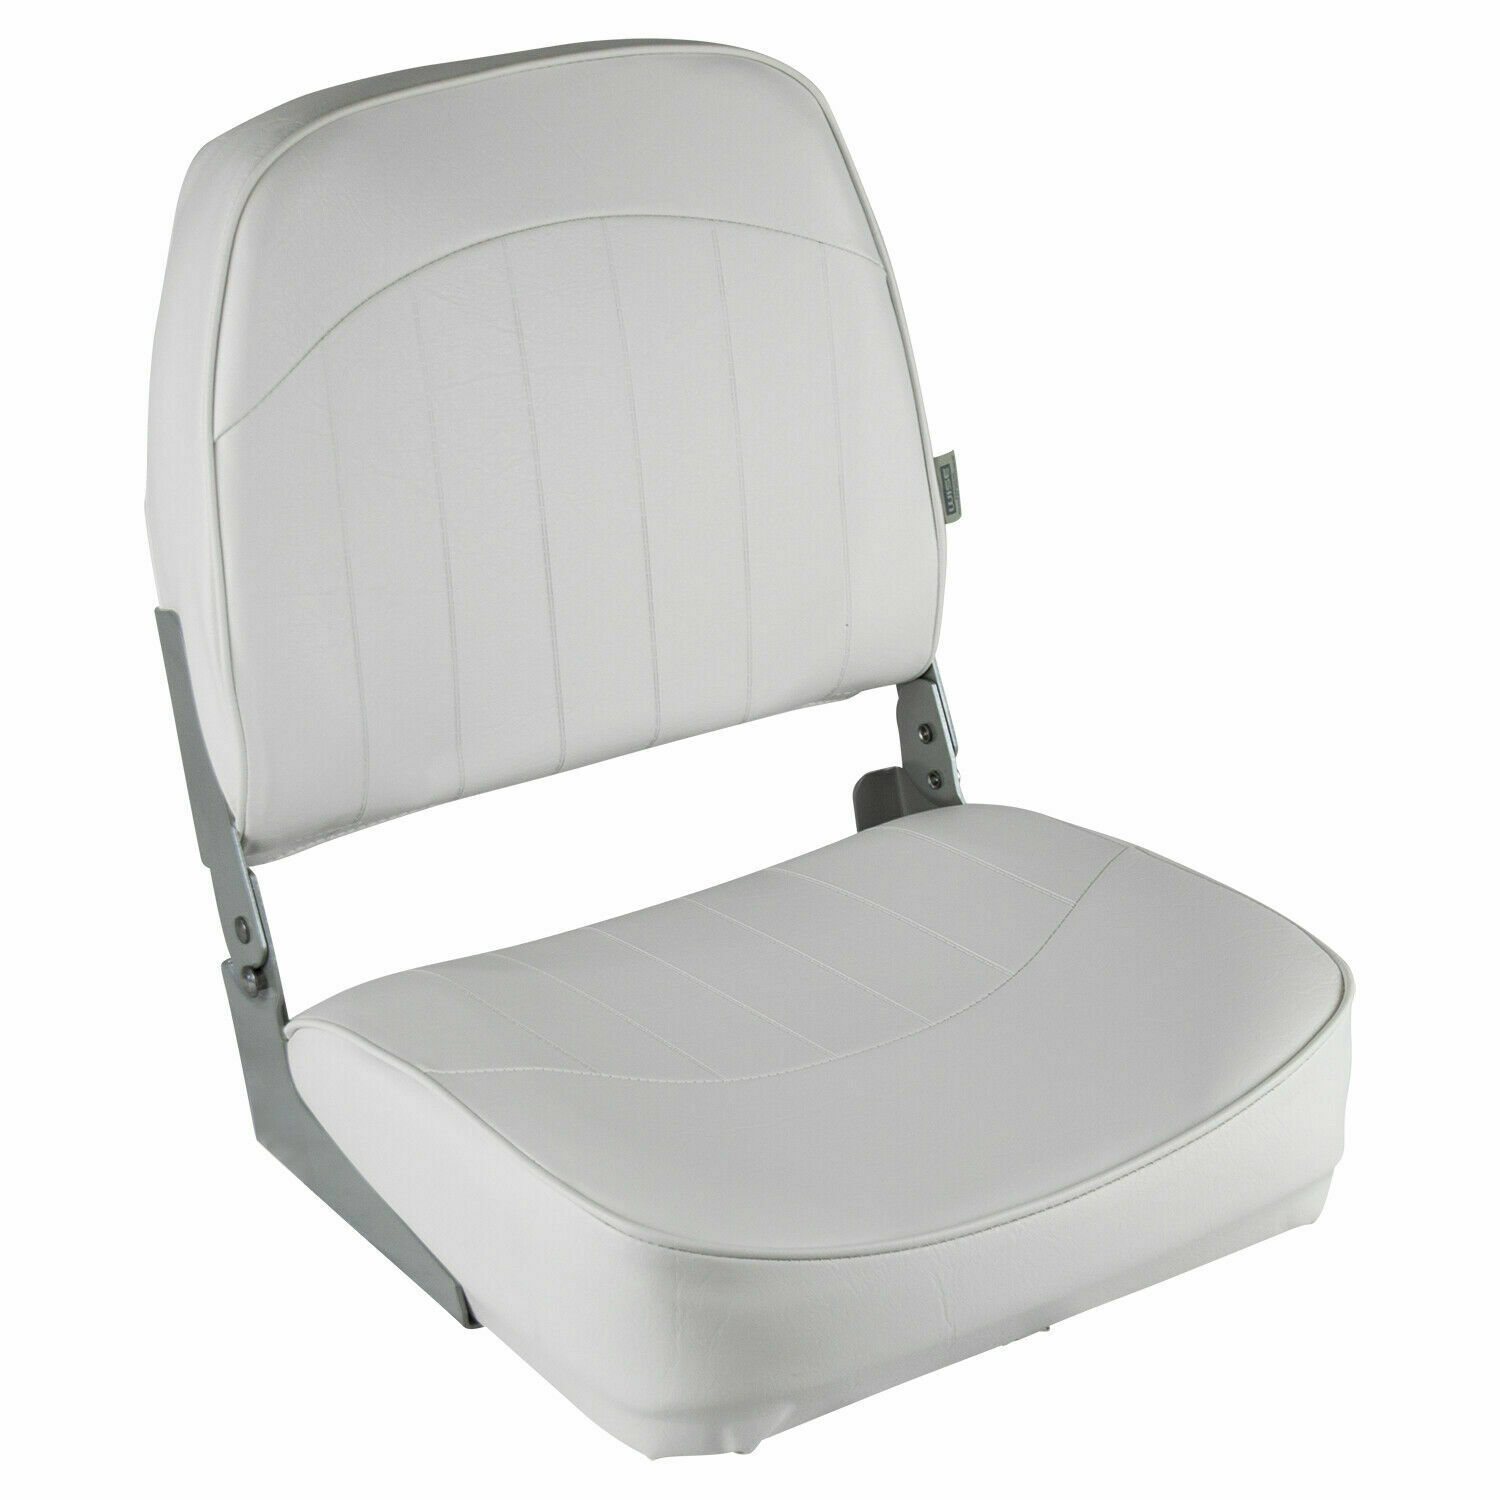 2 X Wise 8wd734pls-710 Low Back Boat Seat, White Set Of 2 Seats